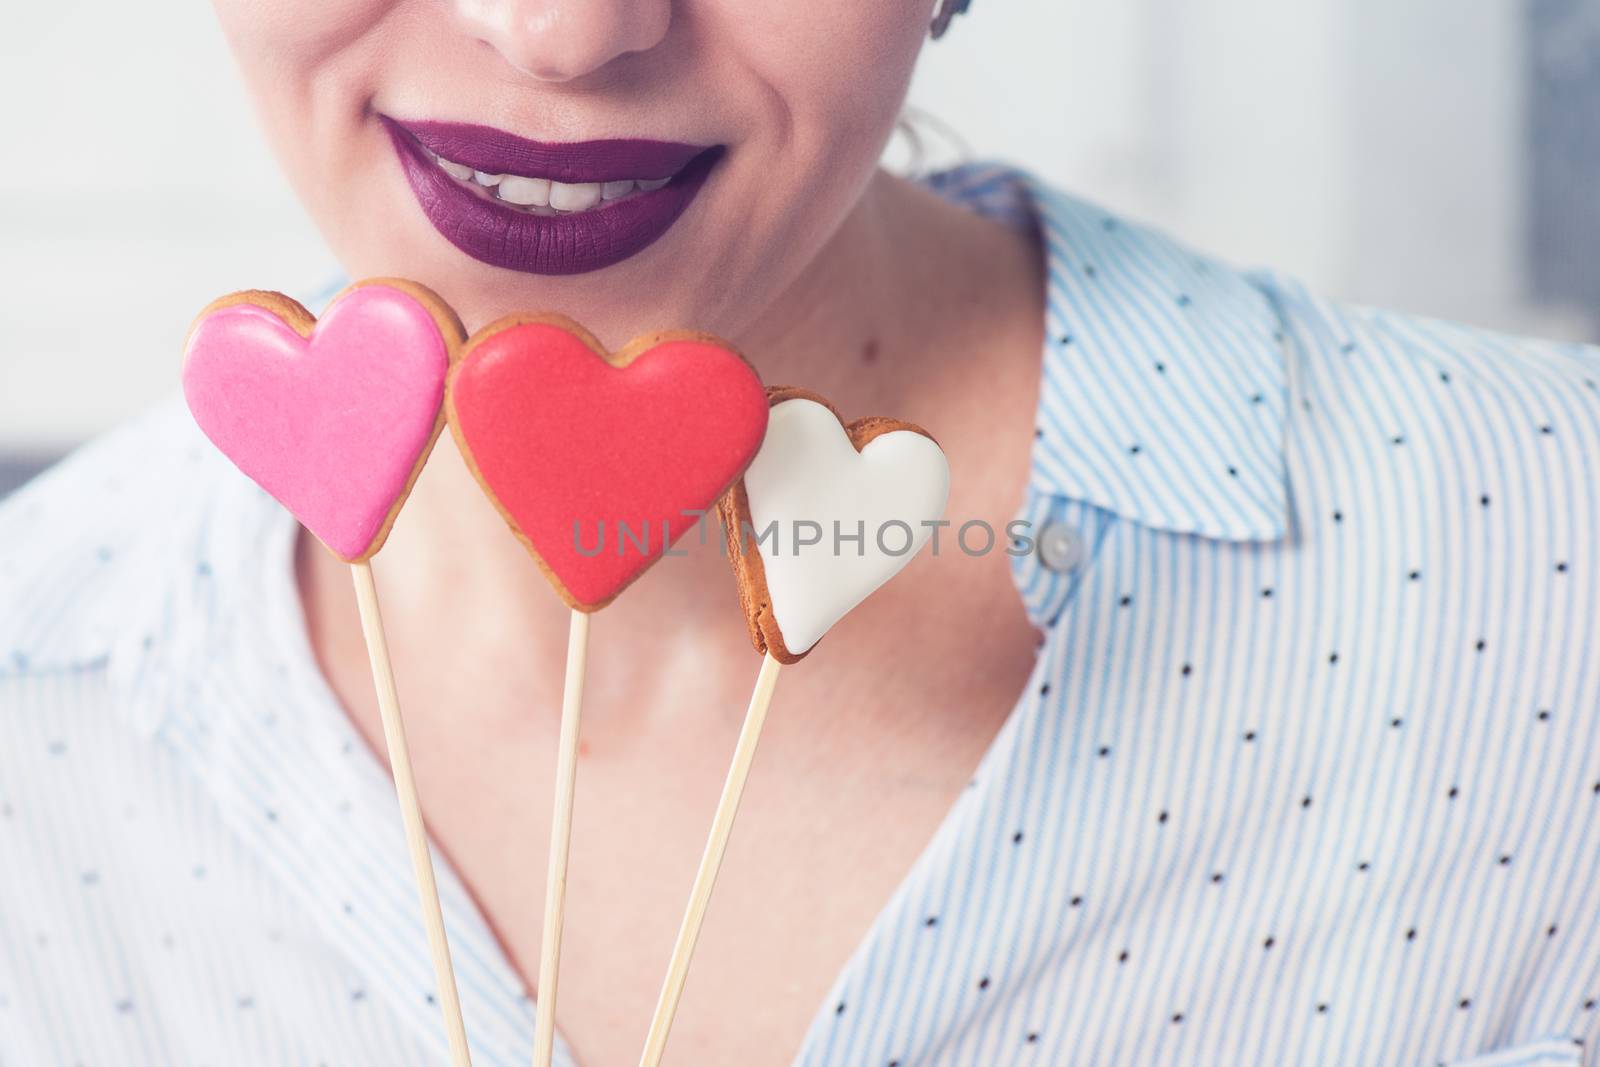 Lips and hearts by rusak